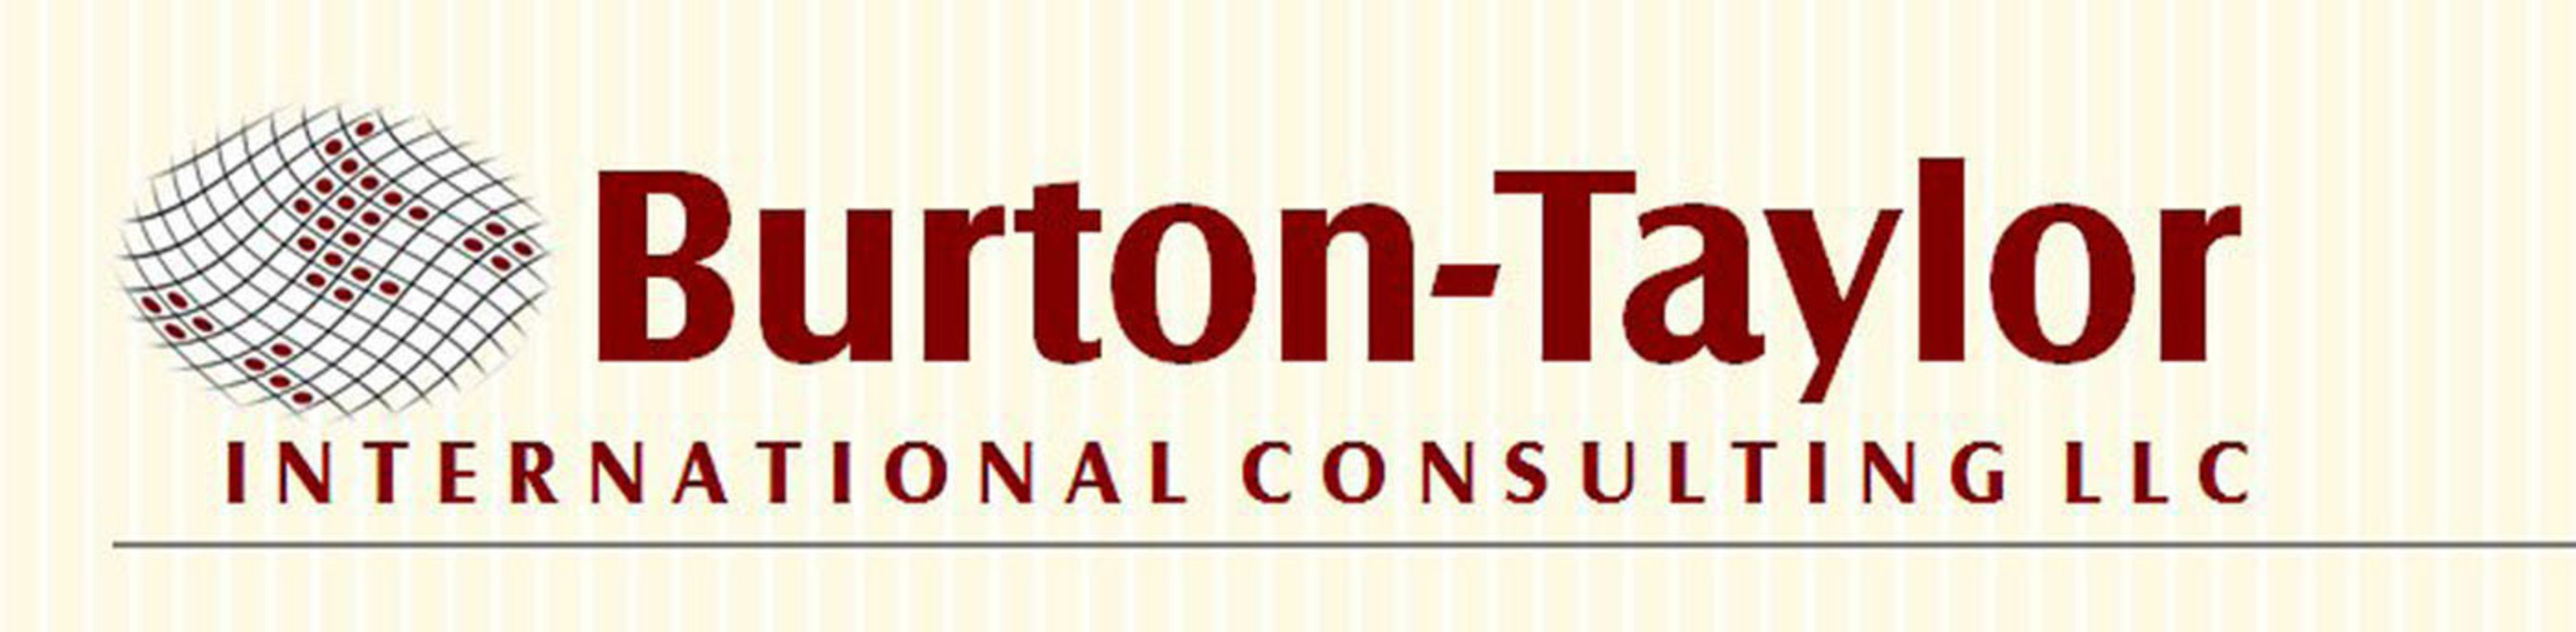 Burton-Taylor International Consulting LLC is a recognized leader in information industry market research, strategy and business consulting. B-T Exchange, Market Data, Credit, Risk, Compliance, Media Intelligence and PR share figures are seen as standards globally. The largest information companies, exchange groups, government organizations, regulatory bodies and advisory firms use Burton-Taylor data as their industry benchmark. For more information, please see:  http://www.burton-taylor.com/ (PRNewsFoto/BURTON-TAYLOR INTL CONSULTING)